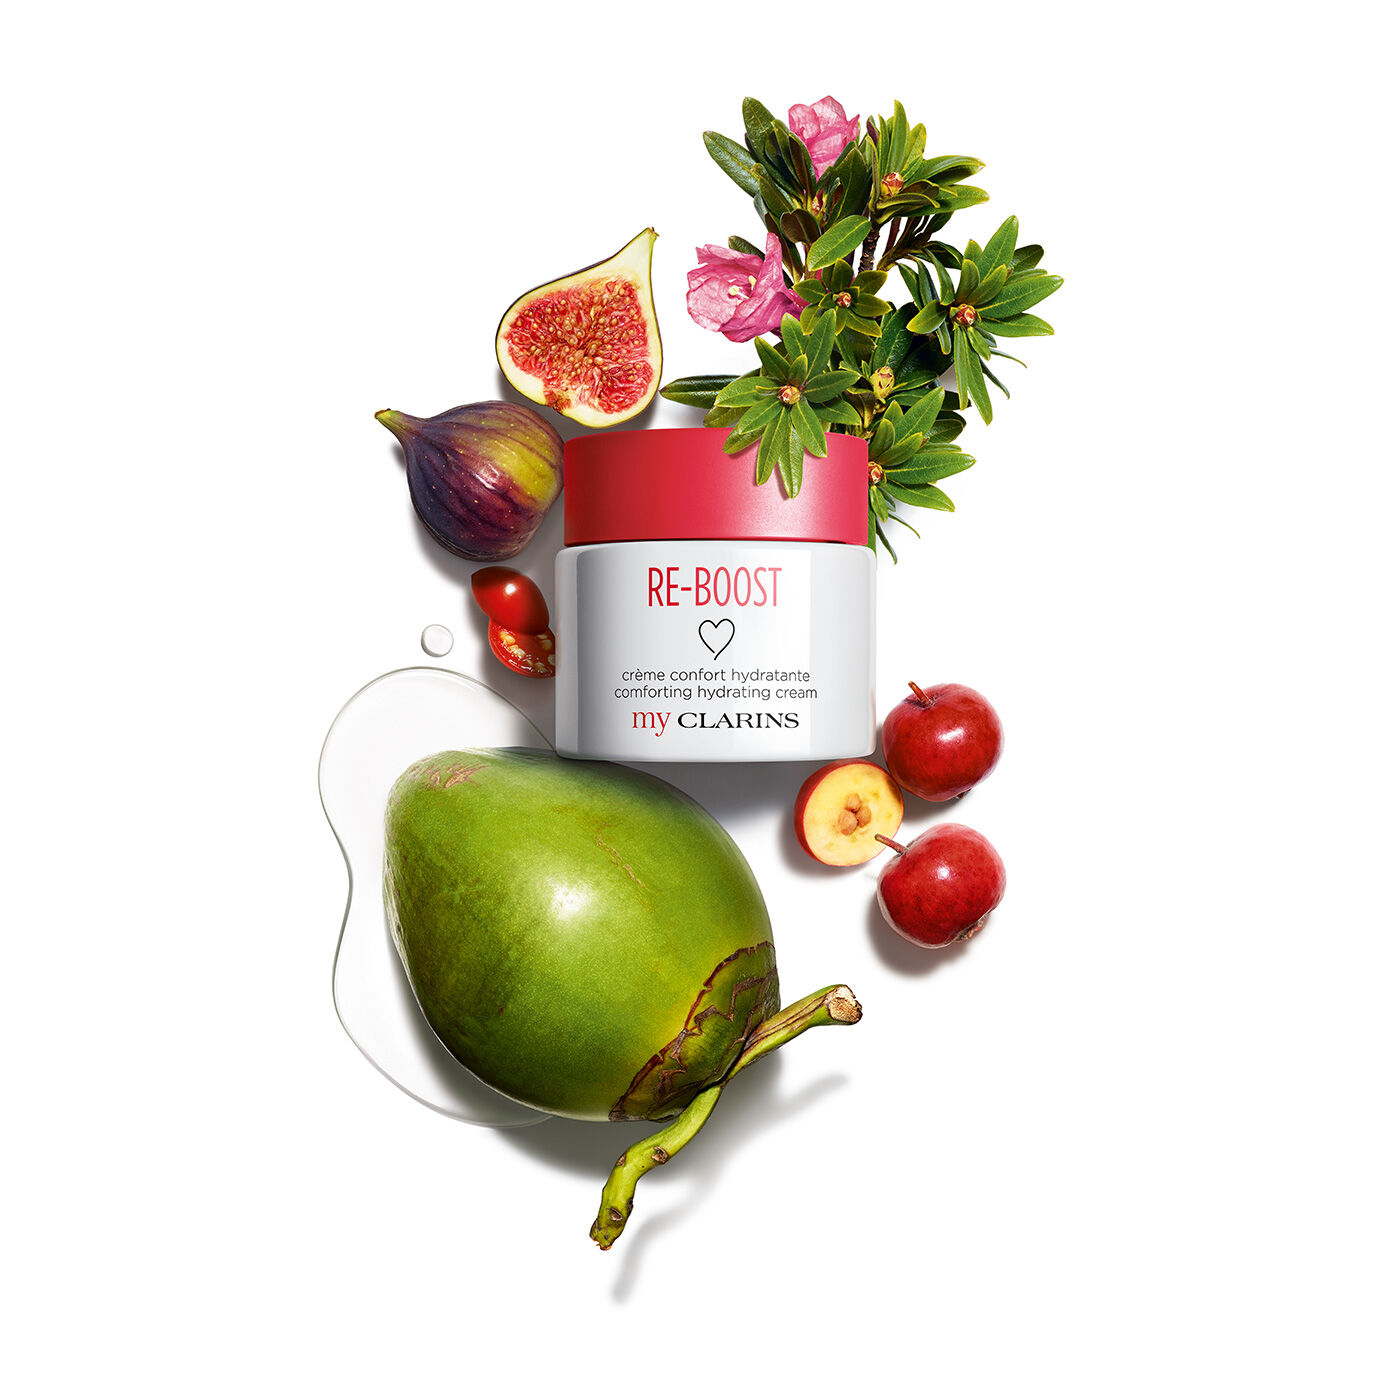 My Clarins RE-BOOST comforting hydrating creme